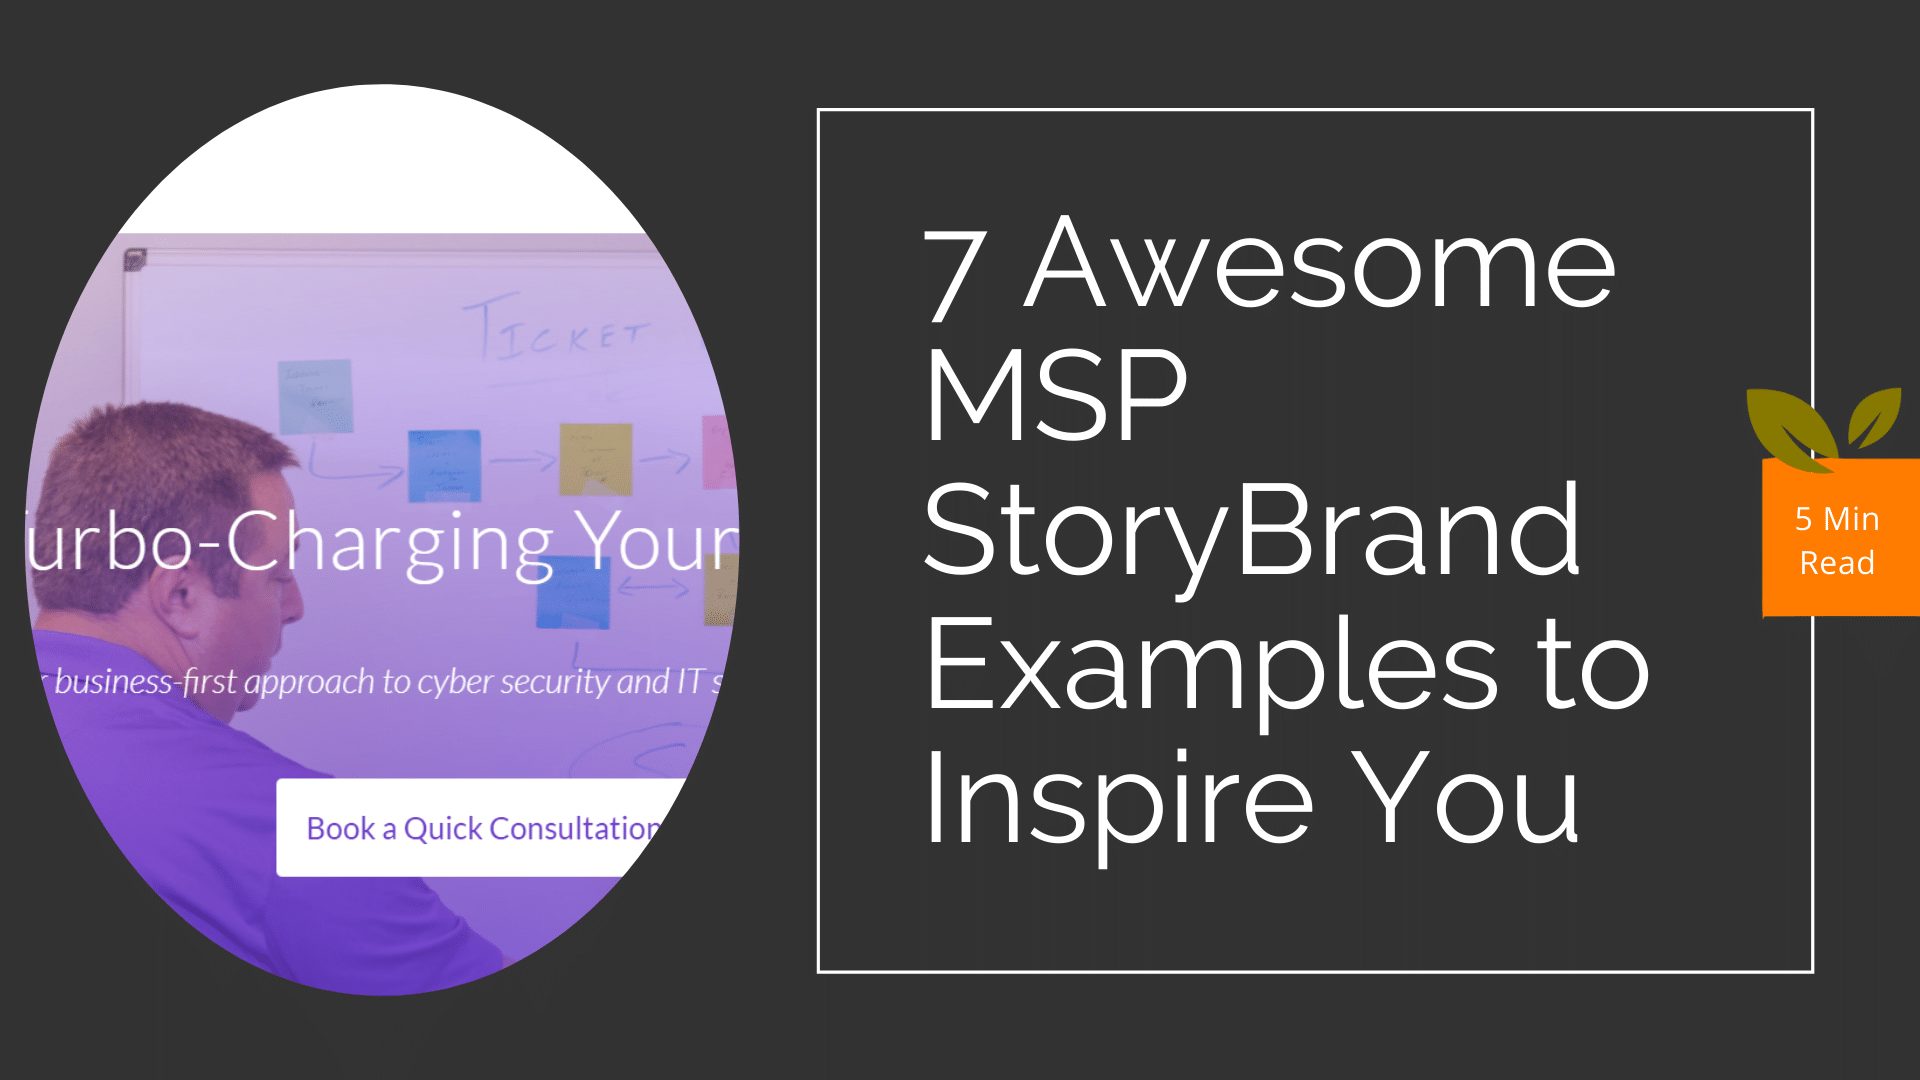 Awesome MSP StoryBrand Examples